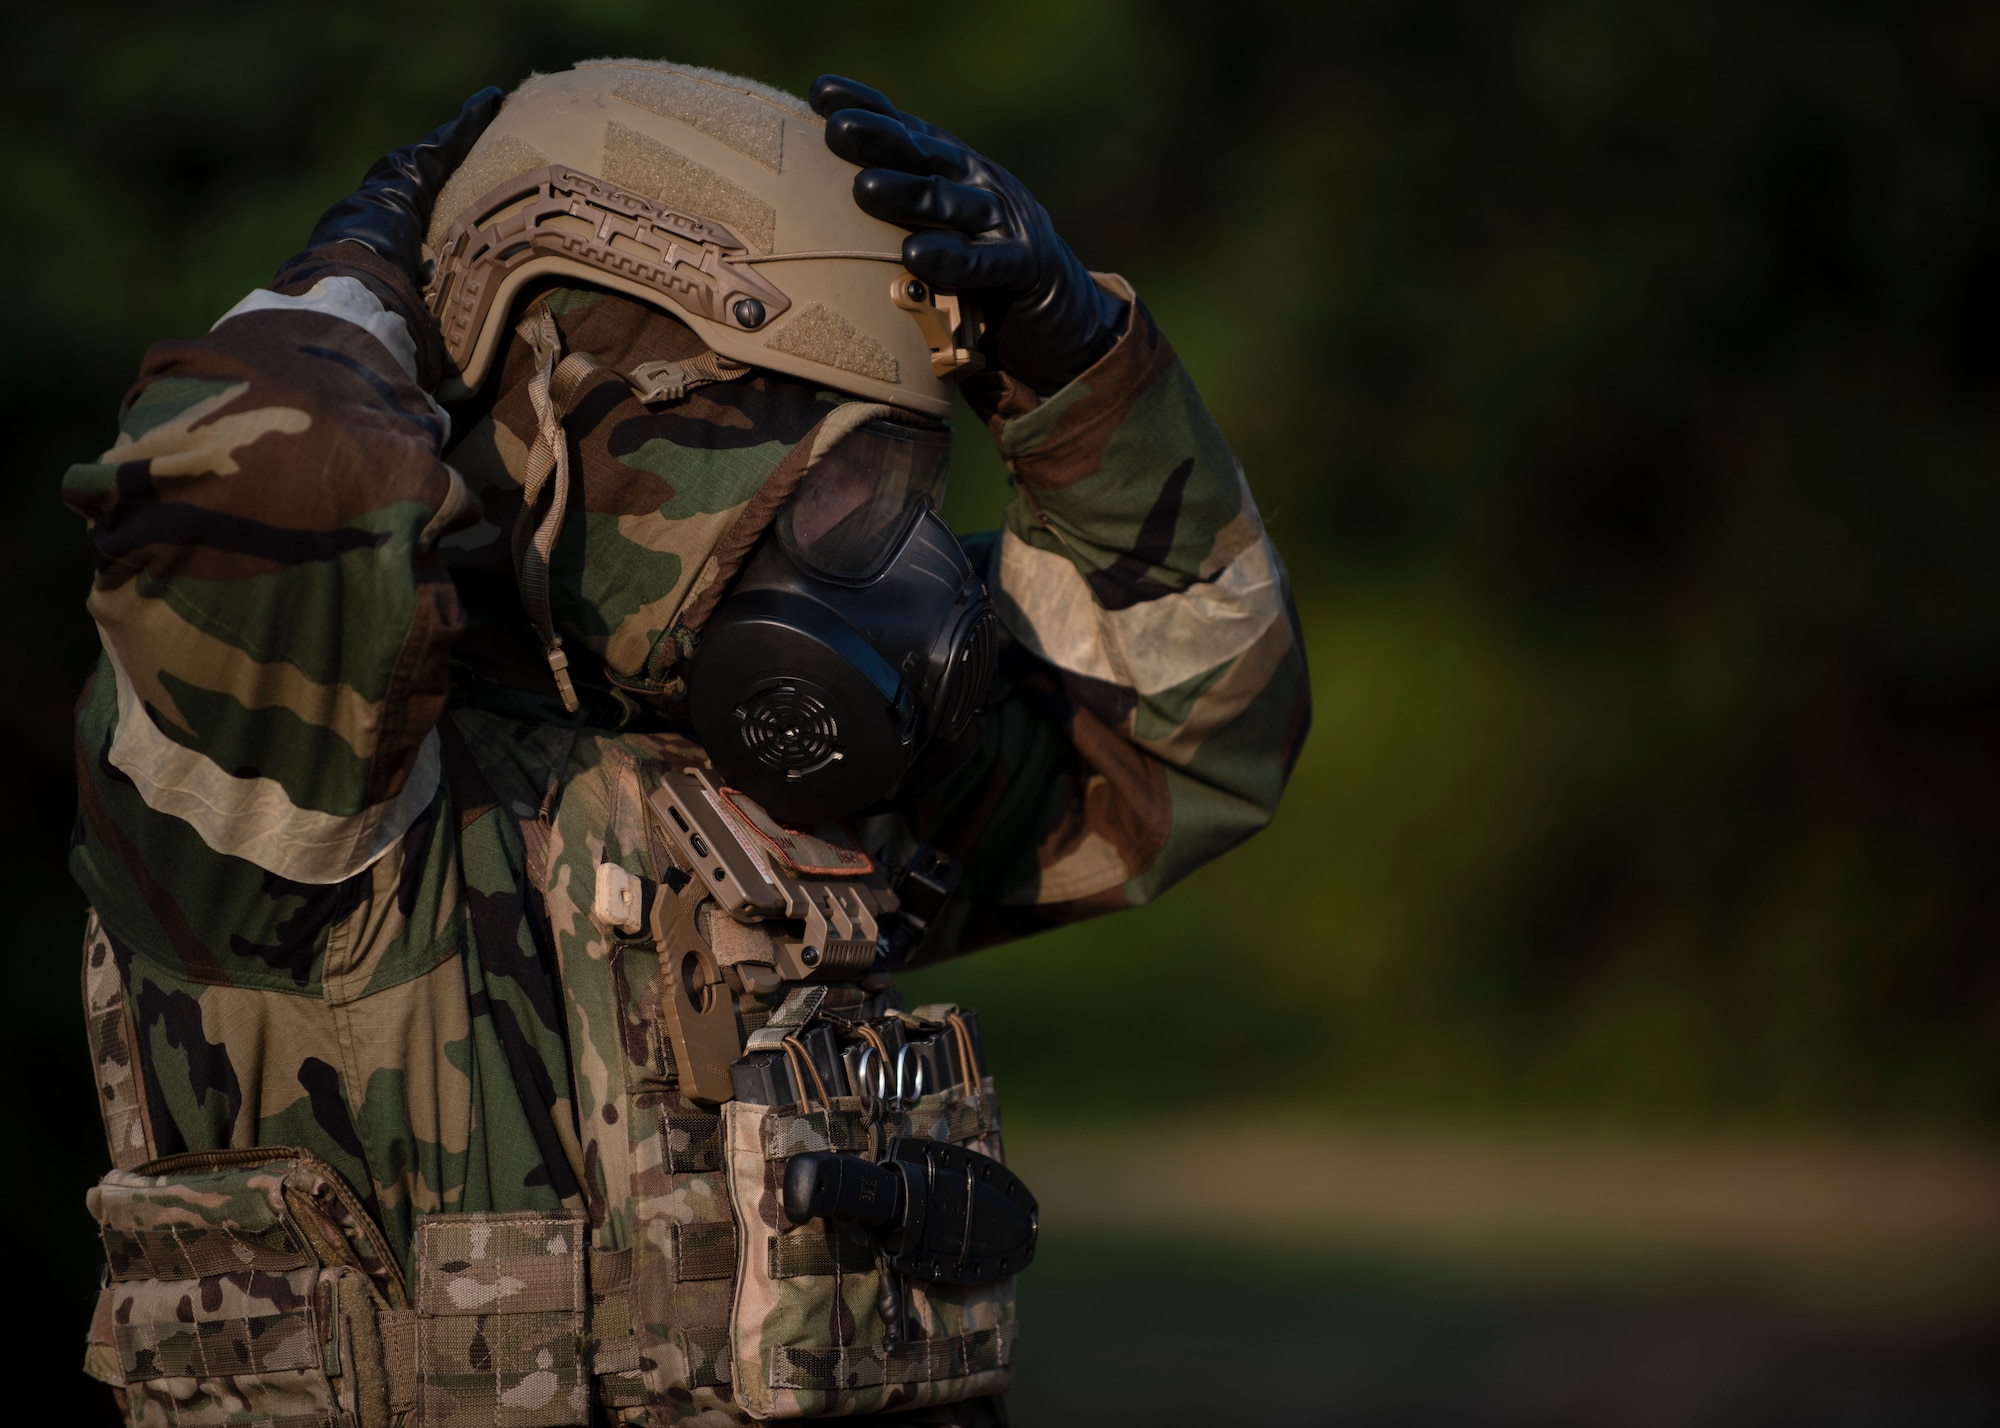 Airman First Class Brian Price, 4th Civil Engineer Squadron Explosive Ordnance Disposal apprentice, adjusts his personal protective equipment before beginning a chemical operation training exercise at Seymour Johnson Air Force Base, North Carolina, August 27, 2020.